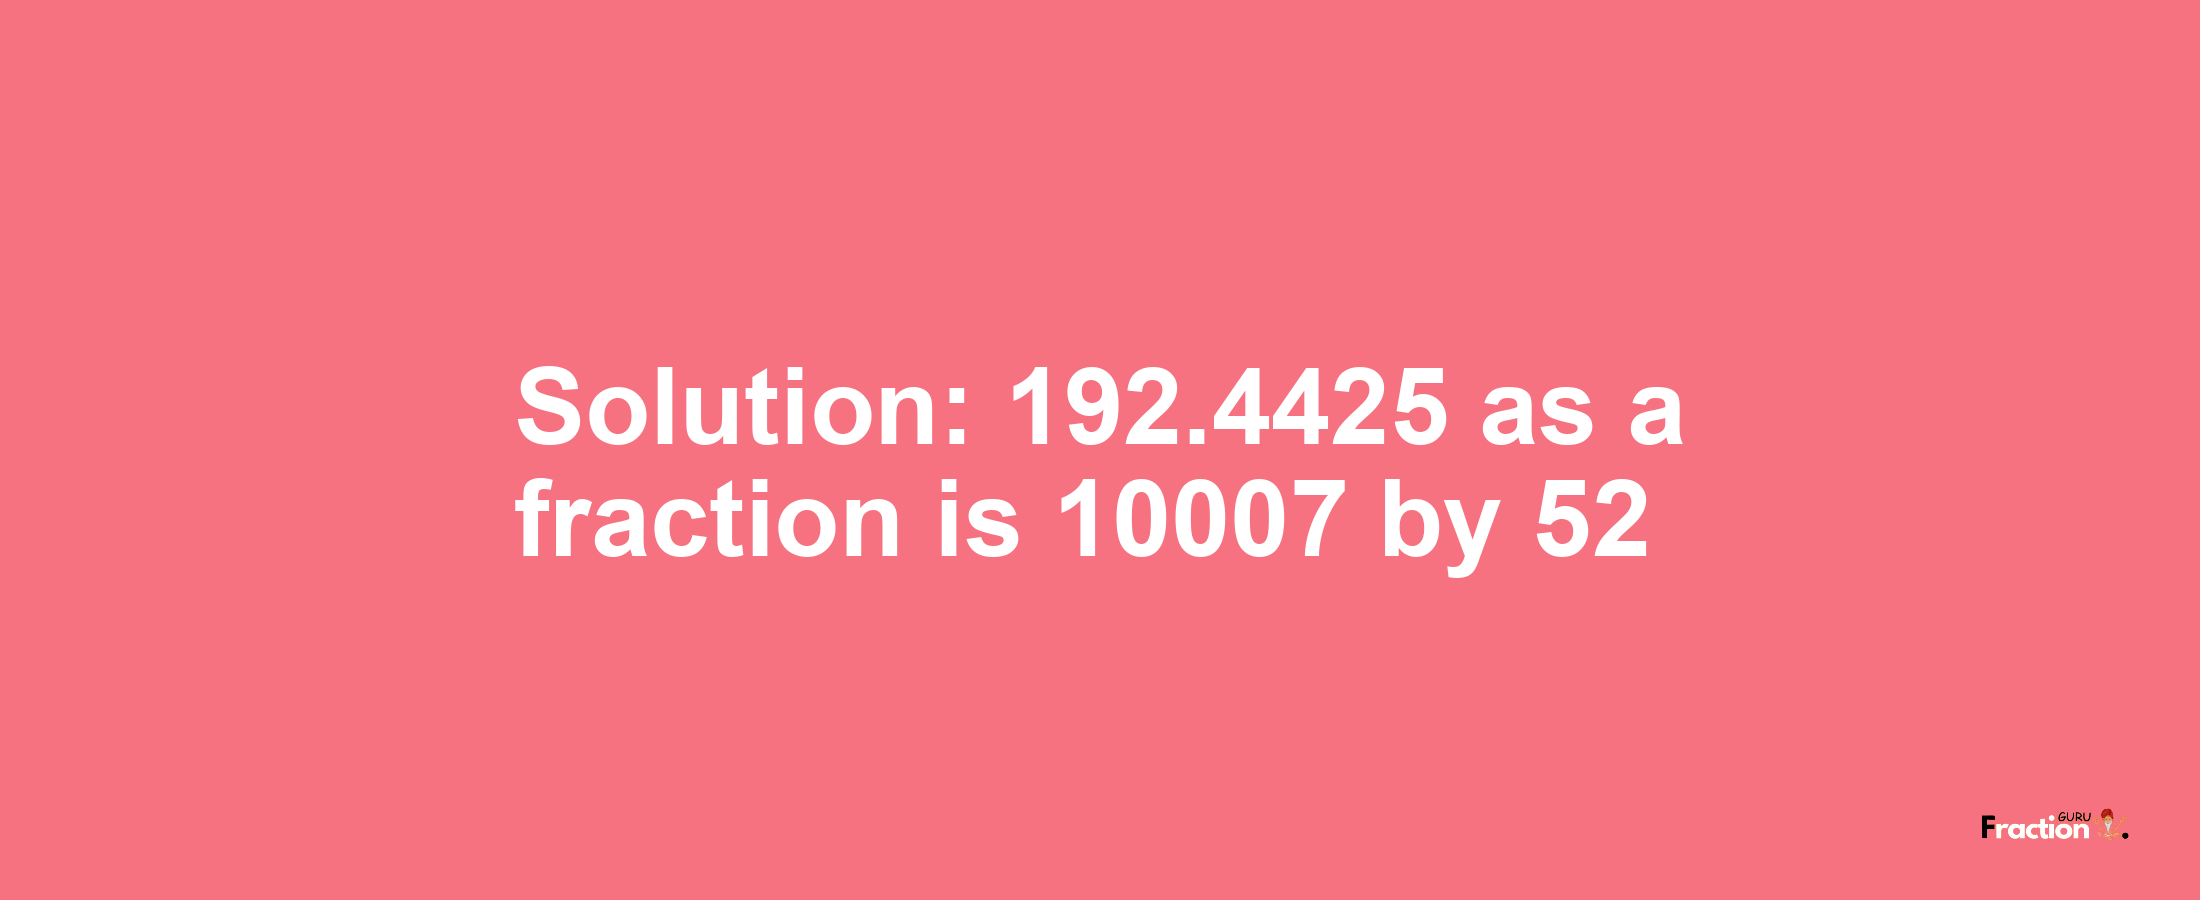 Solution:192.4425 as a fraction is 10007/52